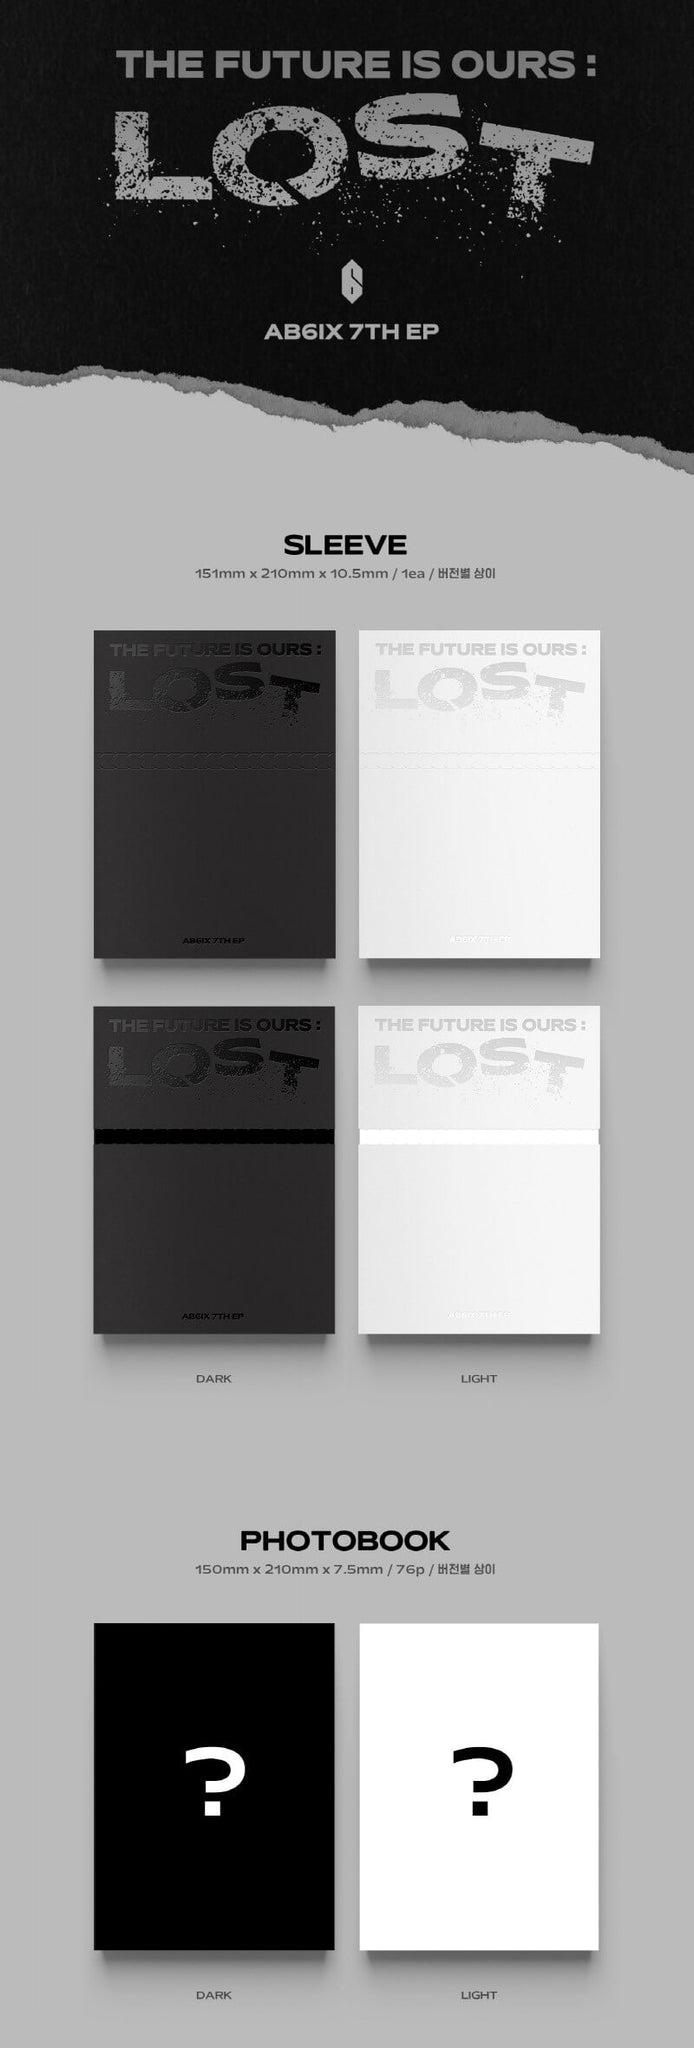 AB6IX THE FUTURE IS OURS : LOST Inclusions Sleeve Photobook